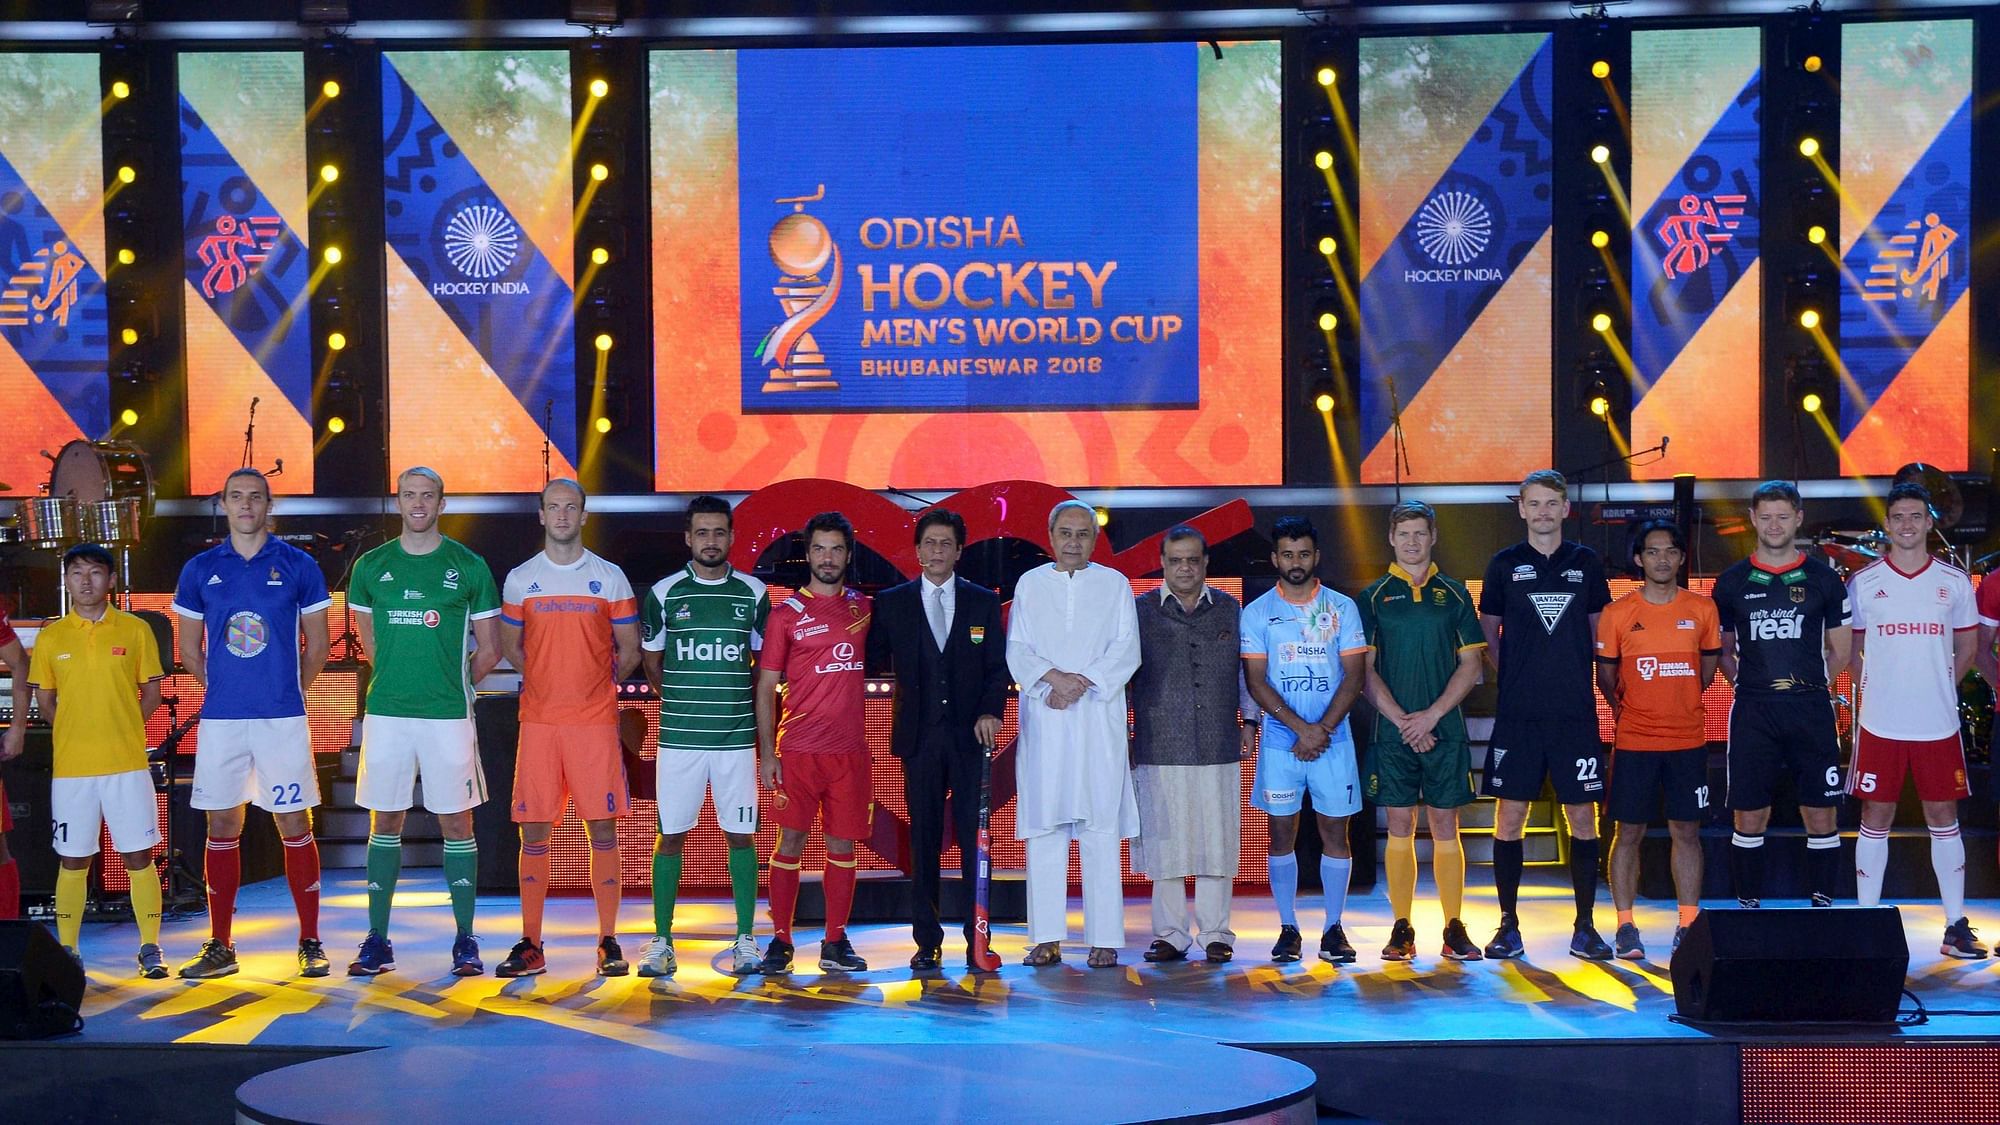 Odisha Chief Minister Naveen Patnaik (C)&nbsp; with Bollywood actor Shah Rukh Khan, International Hockey Federation (FIH) chief Narinder Batra and team captains of participating nations during the inaugural ceremony of Men’s Hockey World Cup 2018, in Bhubaneswar.&nbsp;